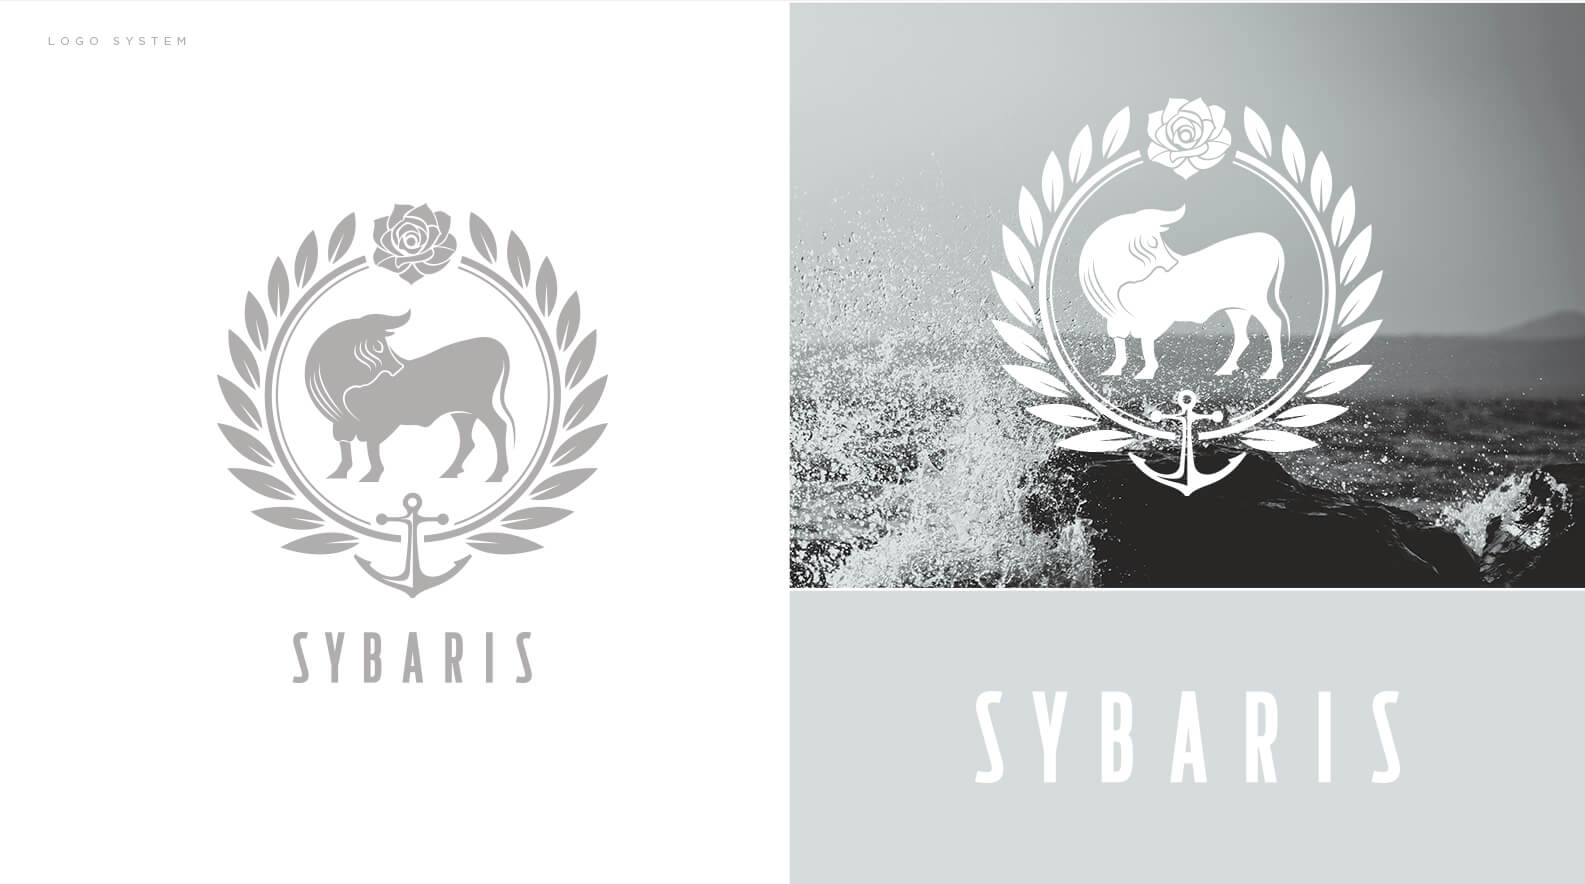 Sybaris logo system and branding by Jacober Creative